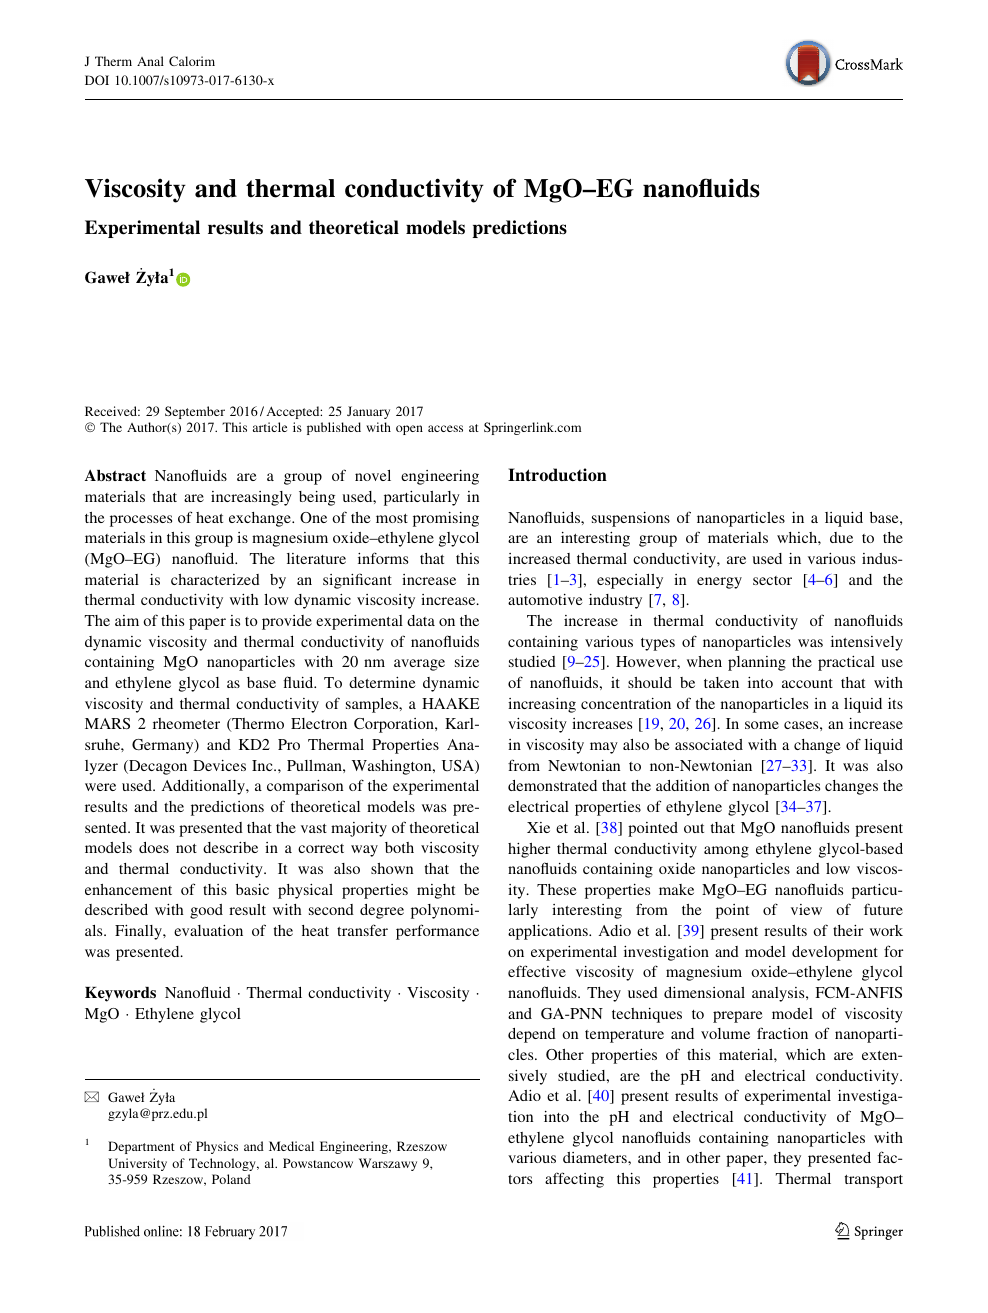 Viscosity And Thermal Conductivity Of Mgo Eg Nanofluids Topic Of Research Paper In Nano Technology Download Scholarly Article Pdf And Read For Free On Cyberleninka Open Science Hub